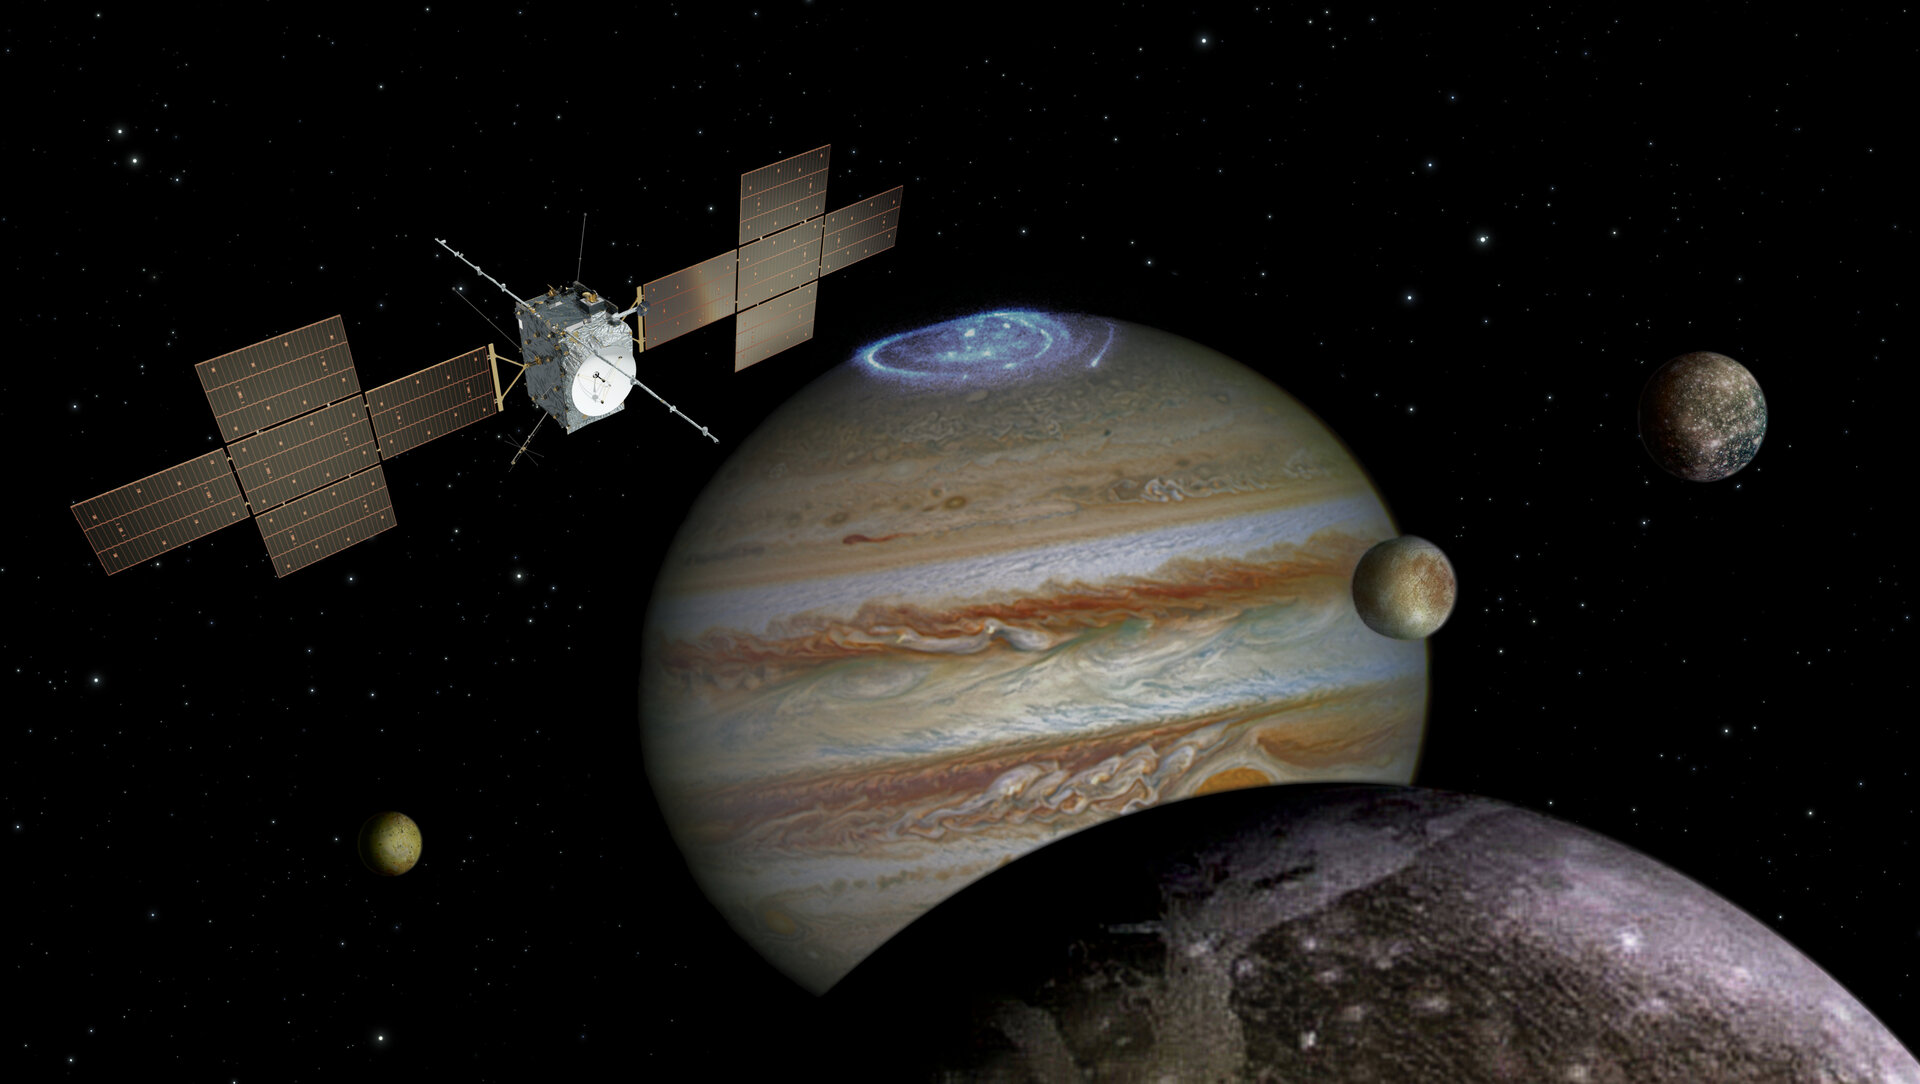 ESA's JUICE mission will launch in 2023 and finally enter orbit around Ganymede in 2034. It will study Europa and Ganymede in detail.